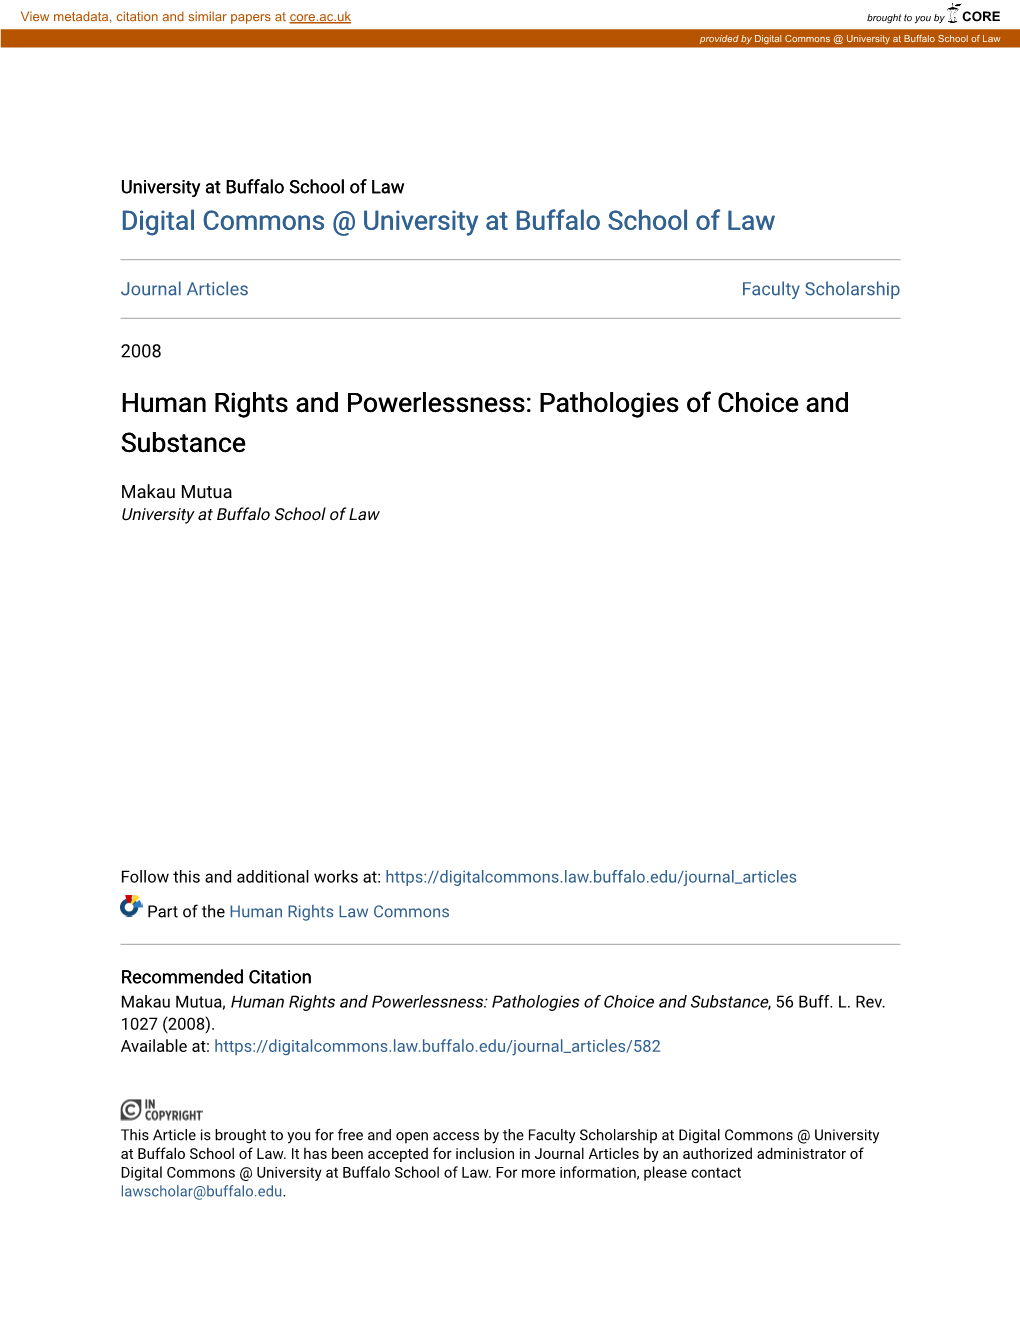 Human Rights and Powerlessness: Pathologies of Choice and Substance